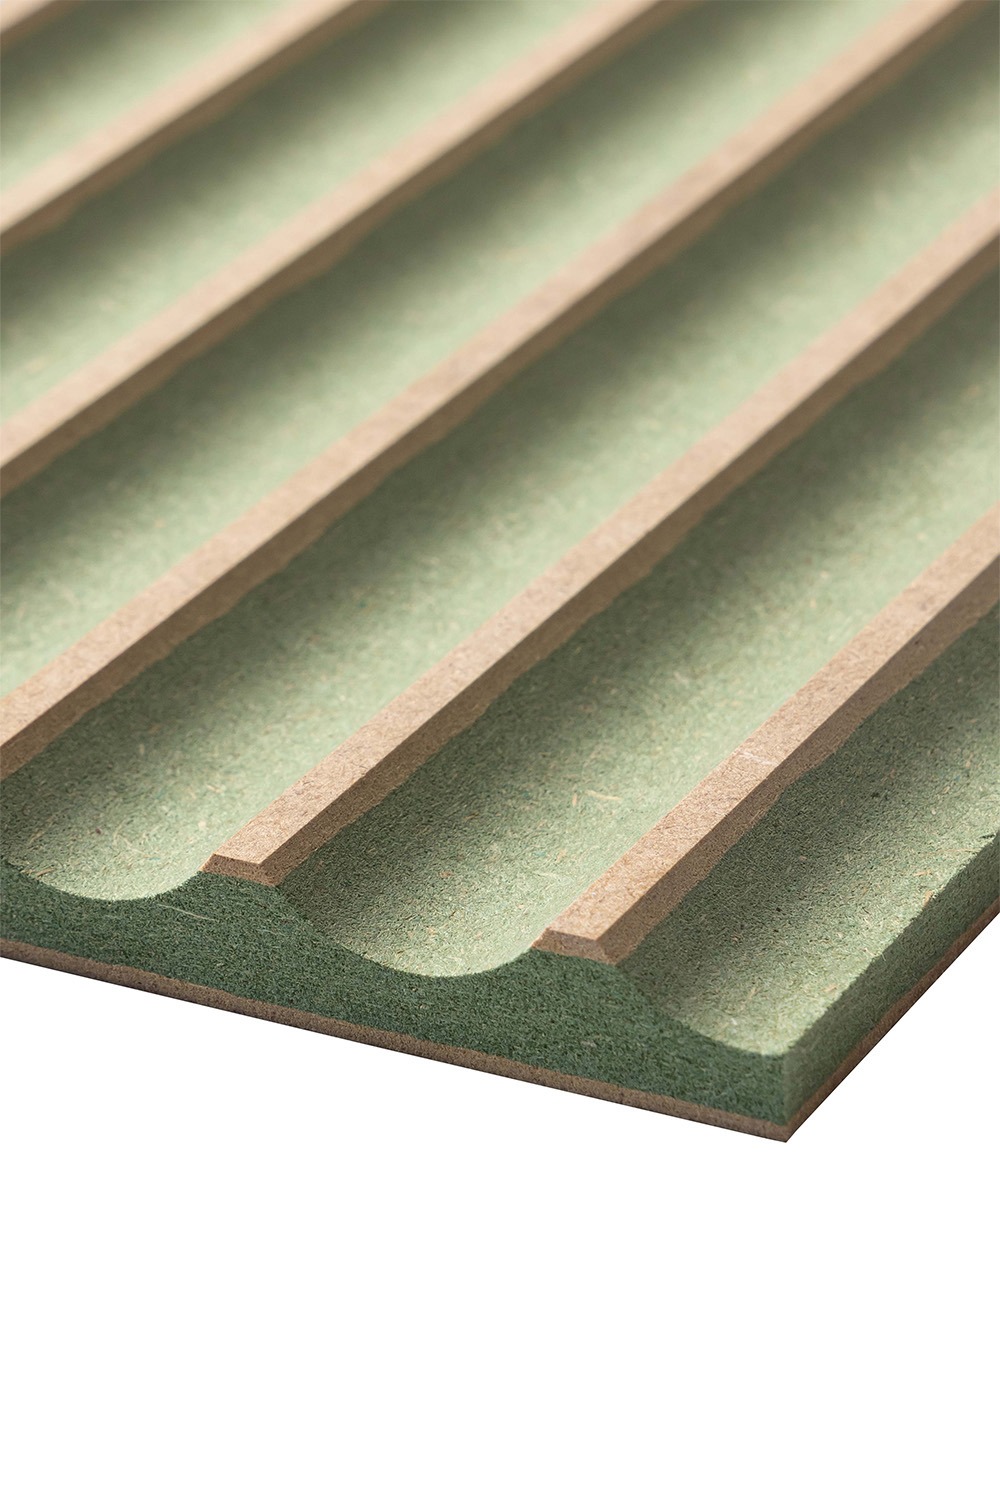 close up image of an unprimed fluted panel 